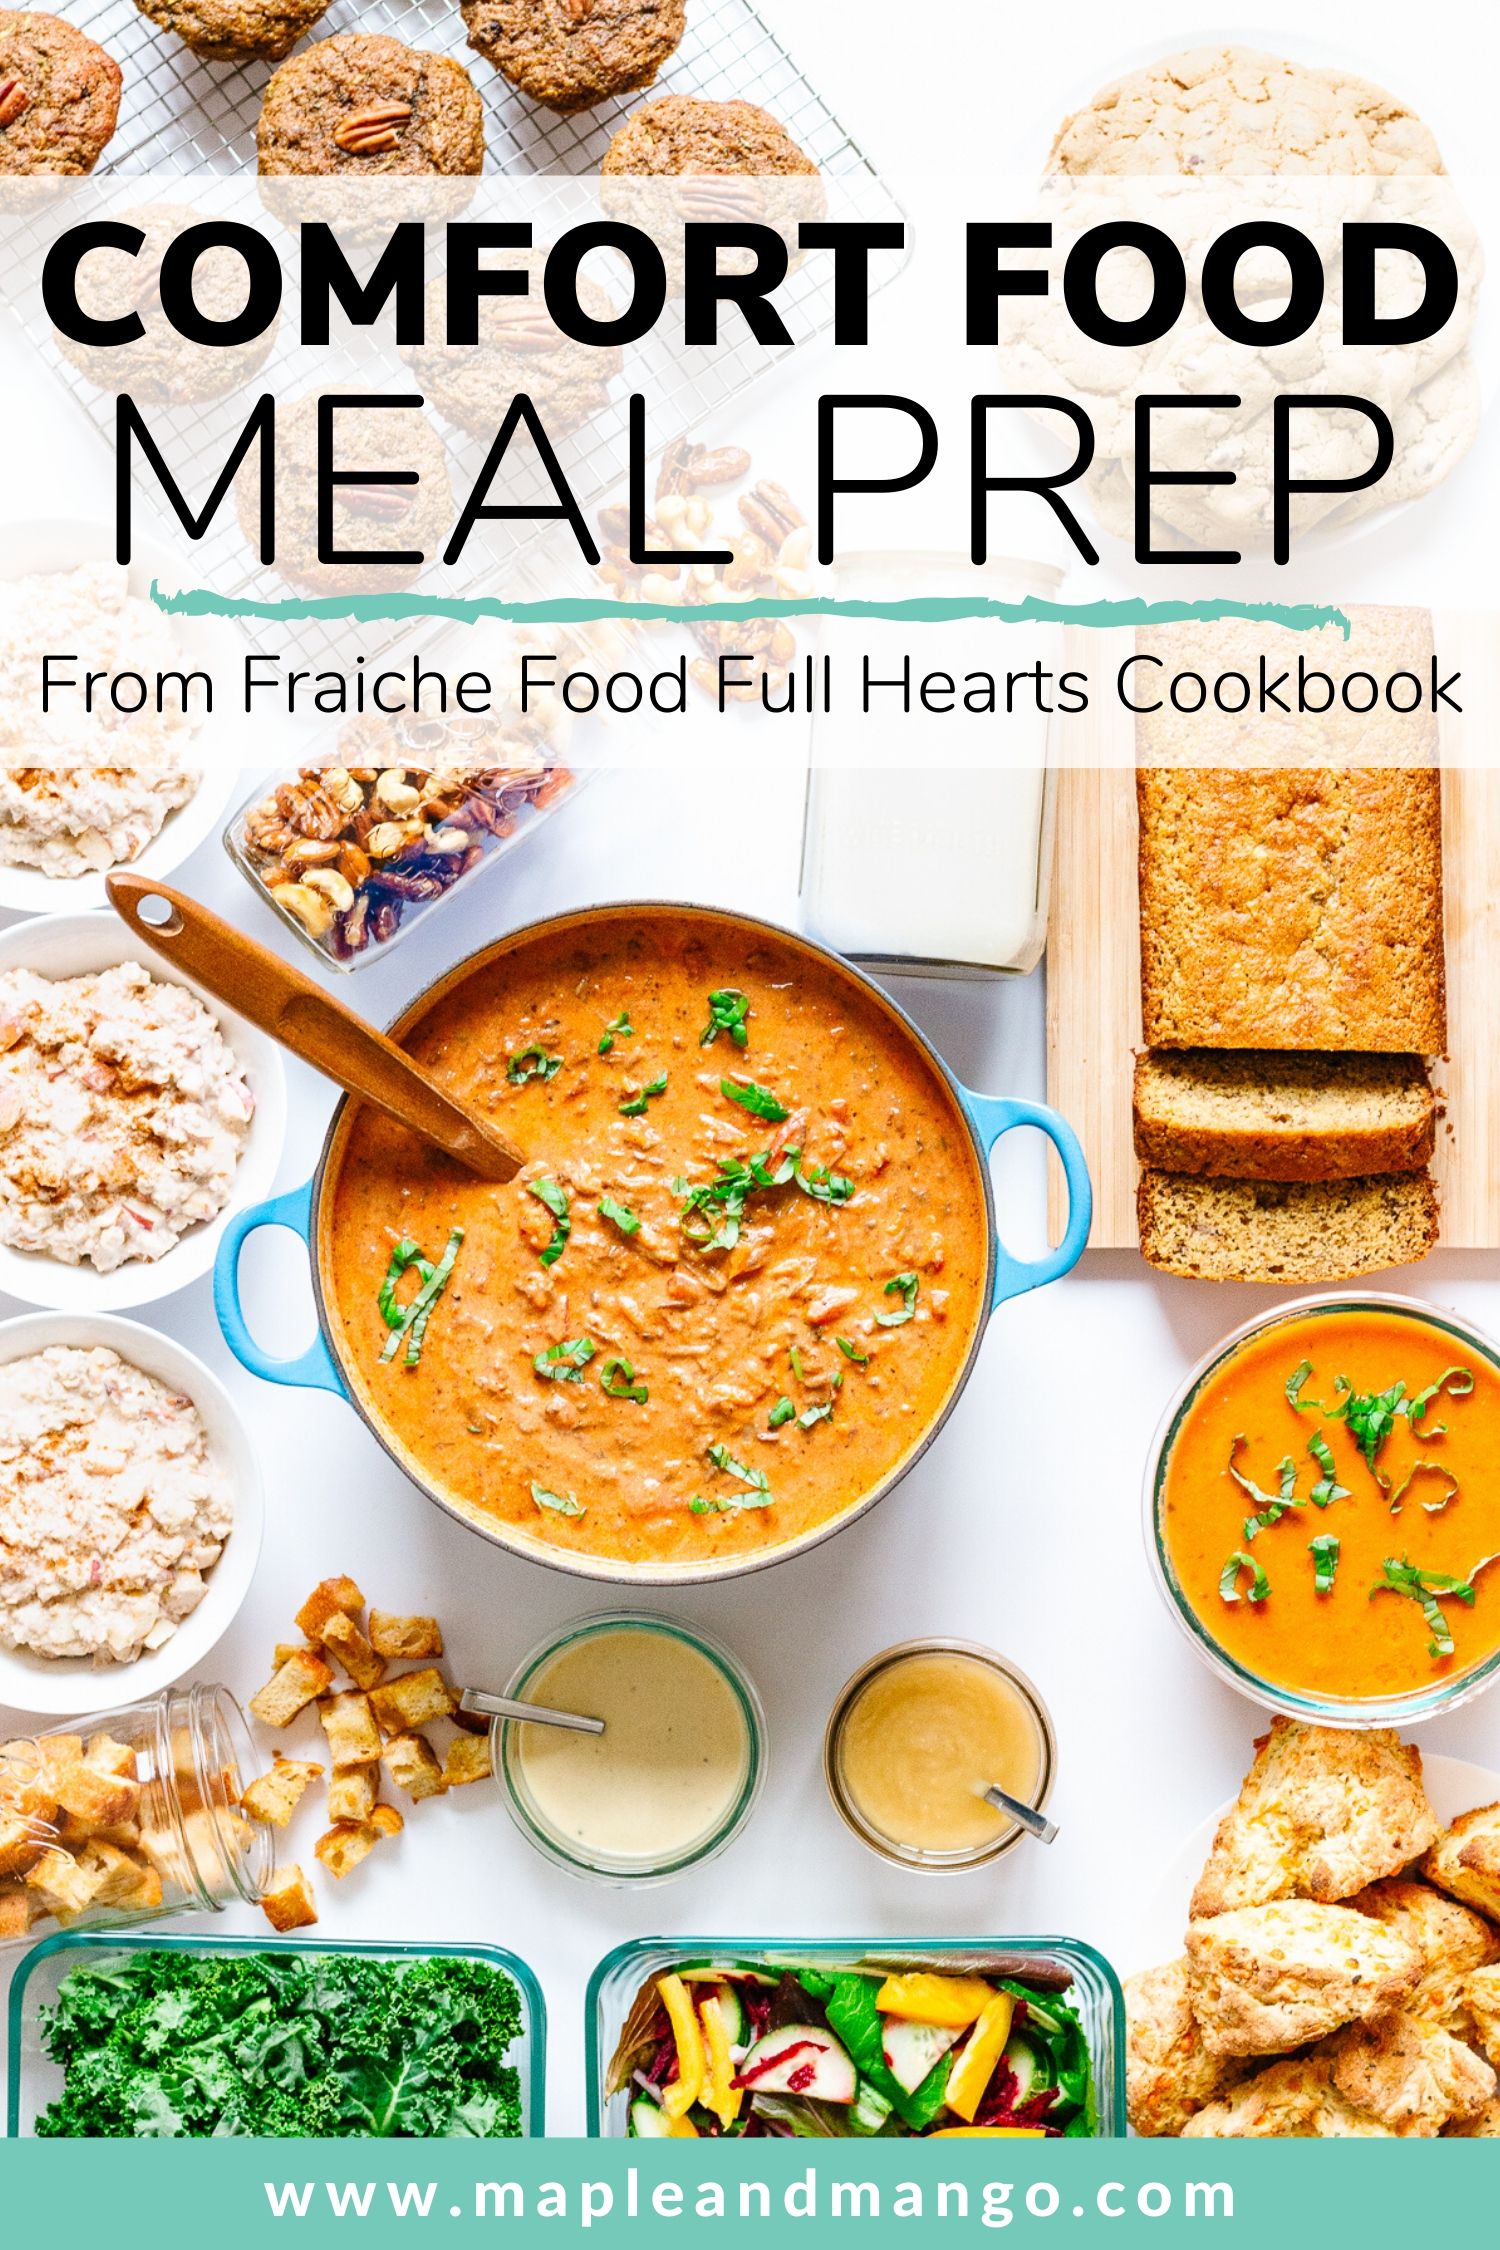 Pinterest image for Comfort Food Meal Prep inspired by the Fraiche Food Full Hearts Cookbook.